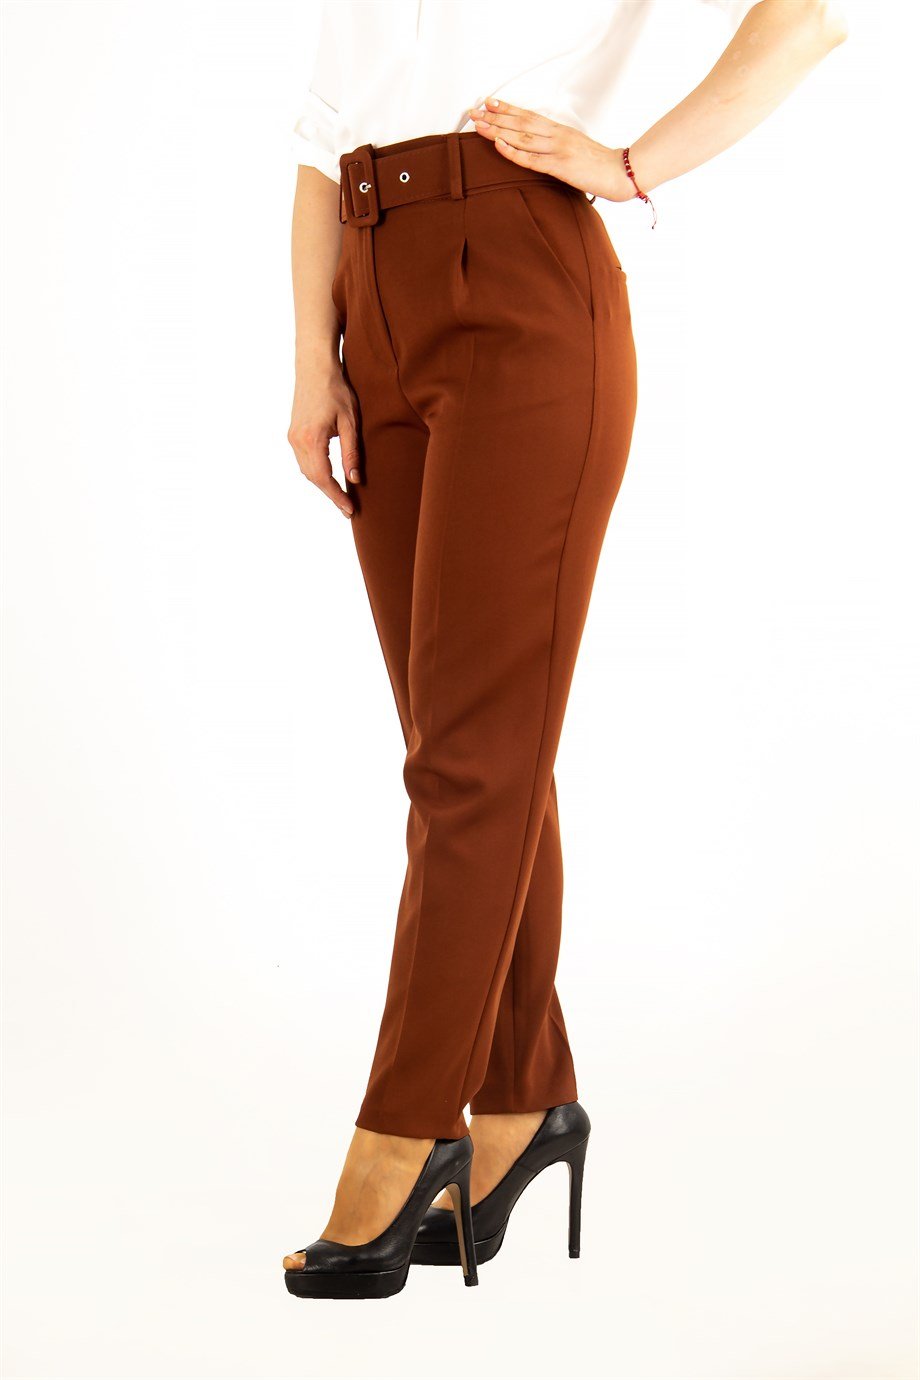 Casual Formal Office Trousers For Ladies Pants With Matching Belt - Brick  Red - Wholesale Womens Clothing Vendors For Boutiques